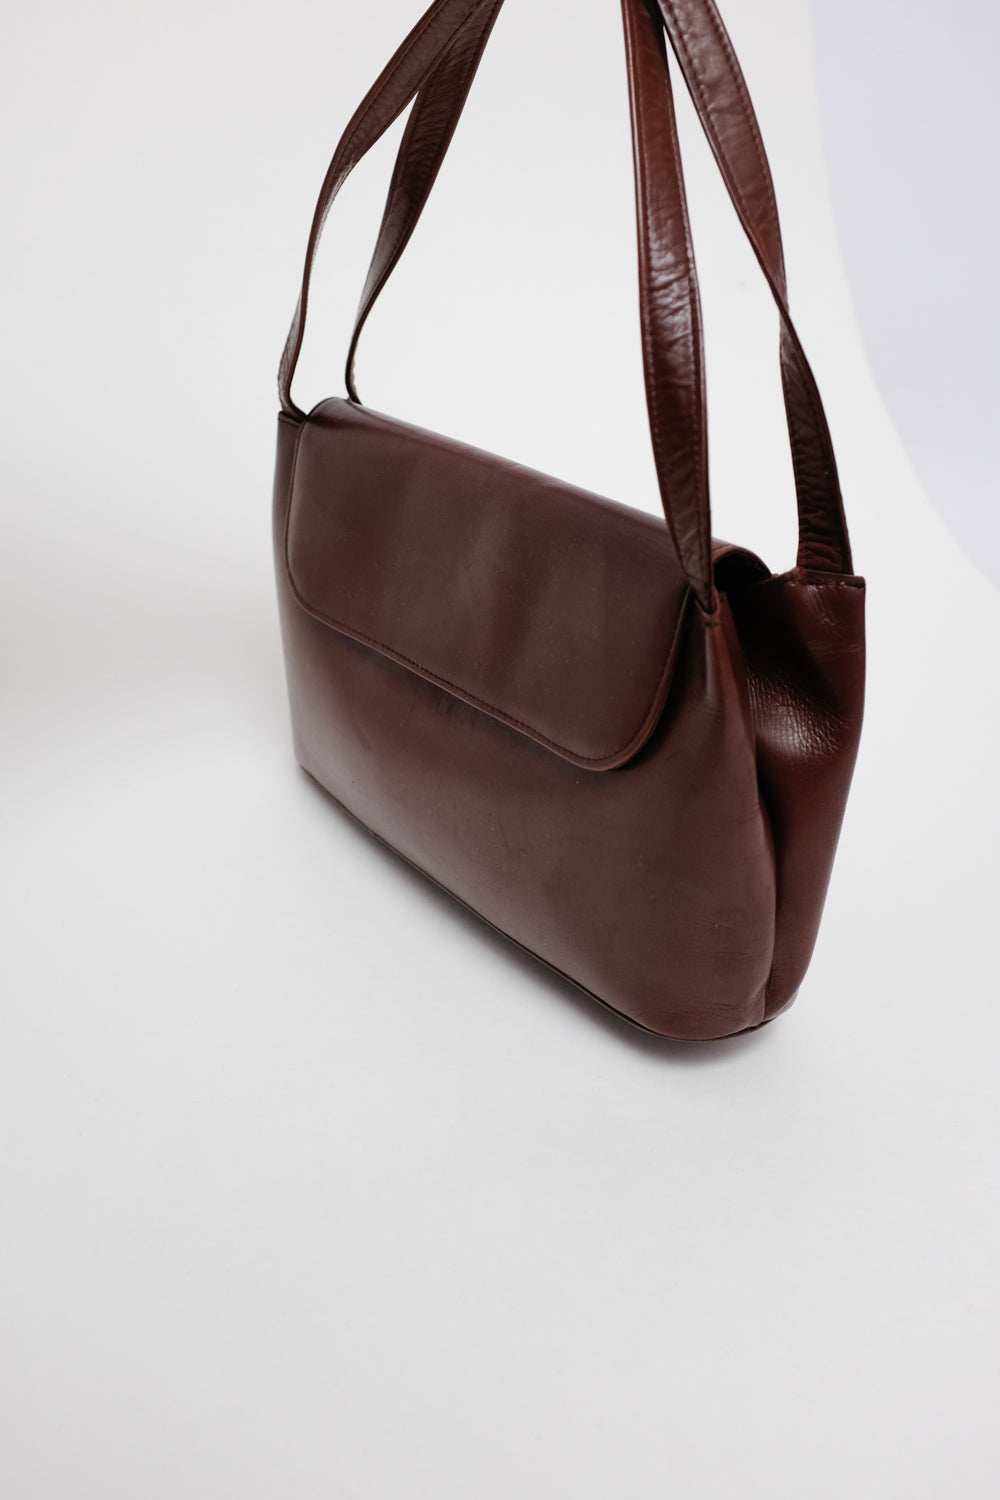 BROWN VINTAGE SMALL LEATHER BAG